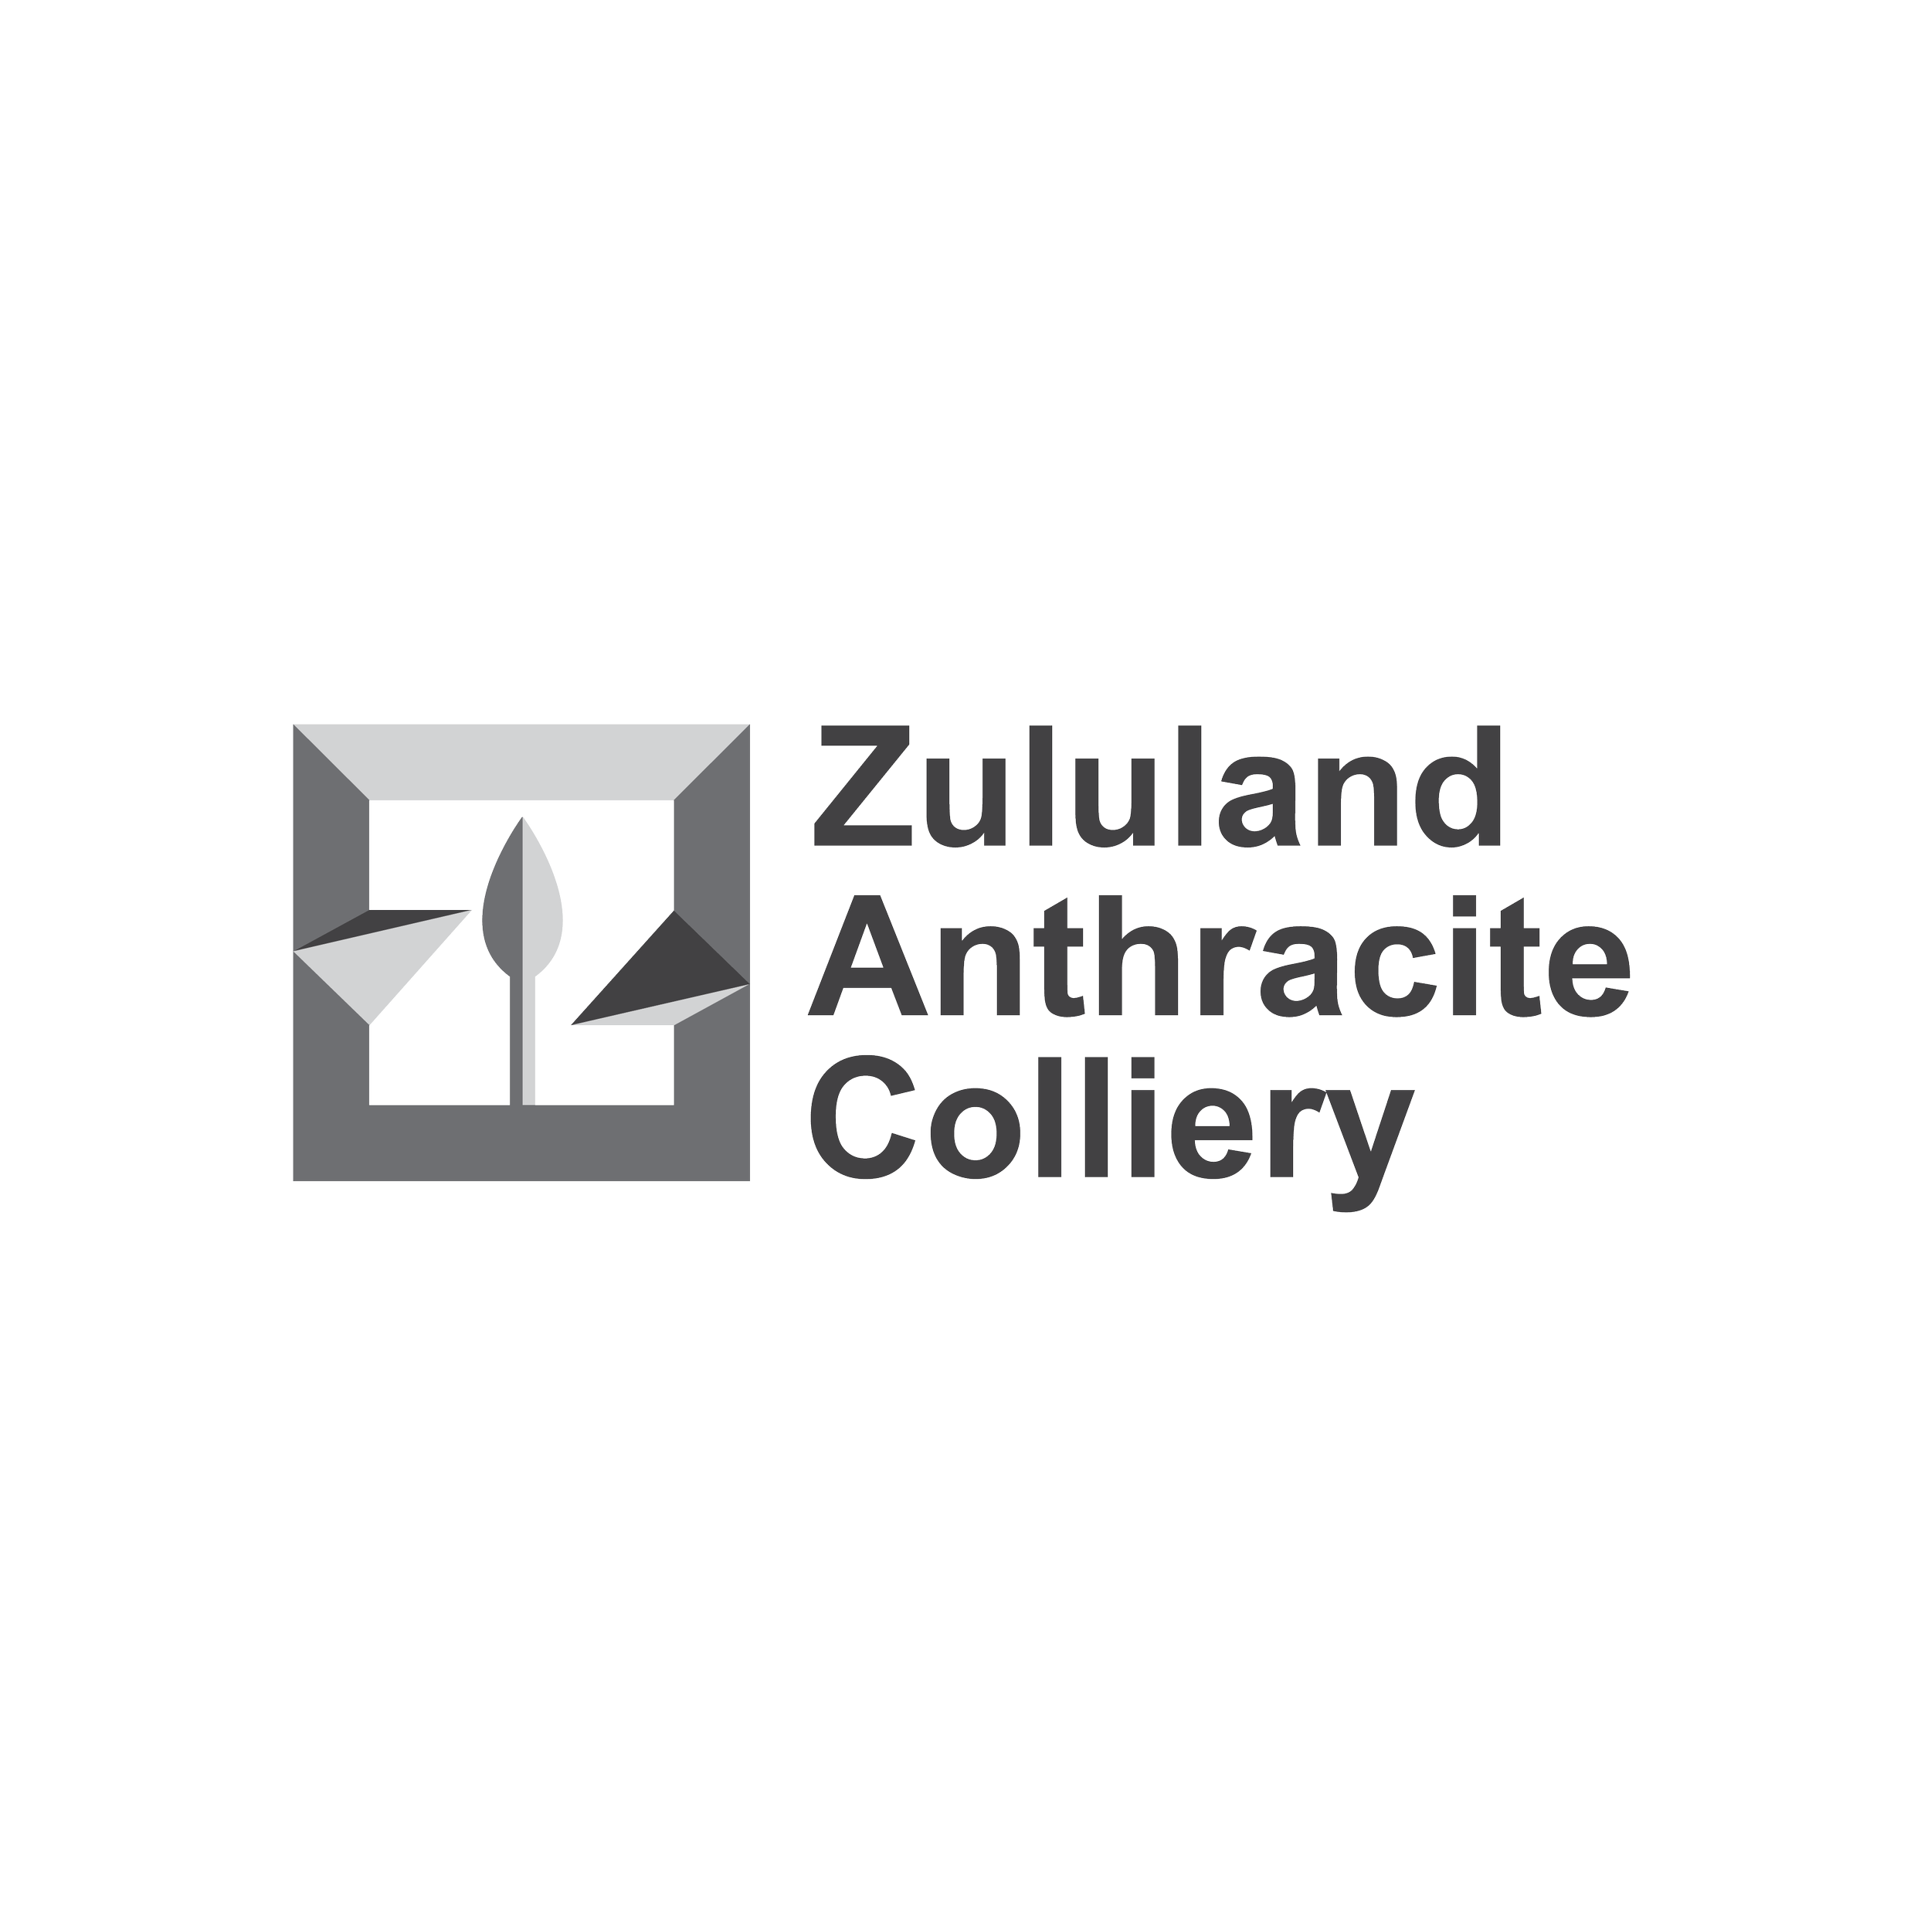 Zululand Anthracite Colliery